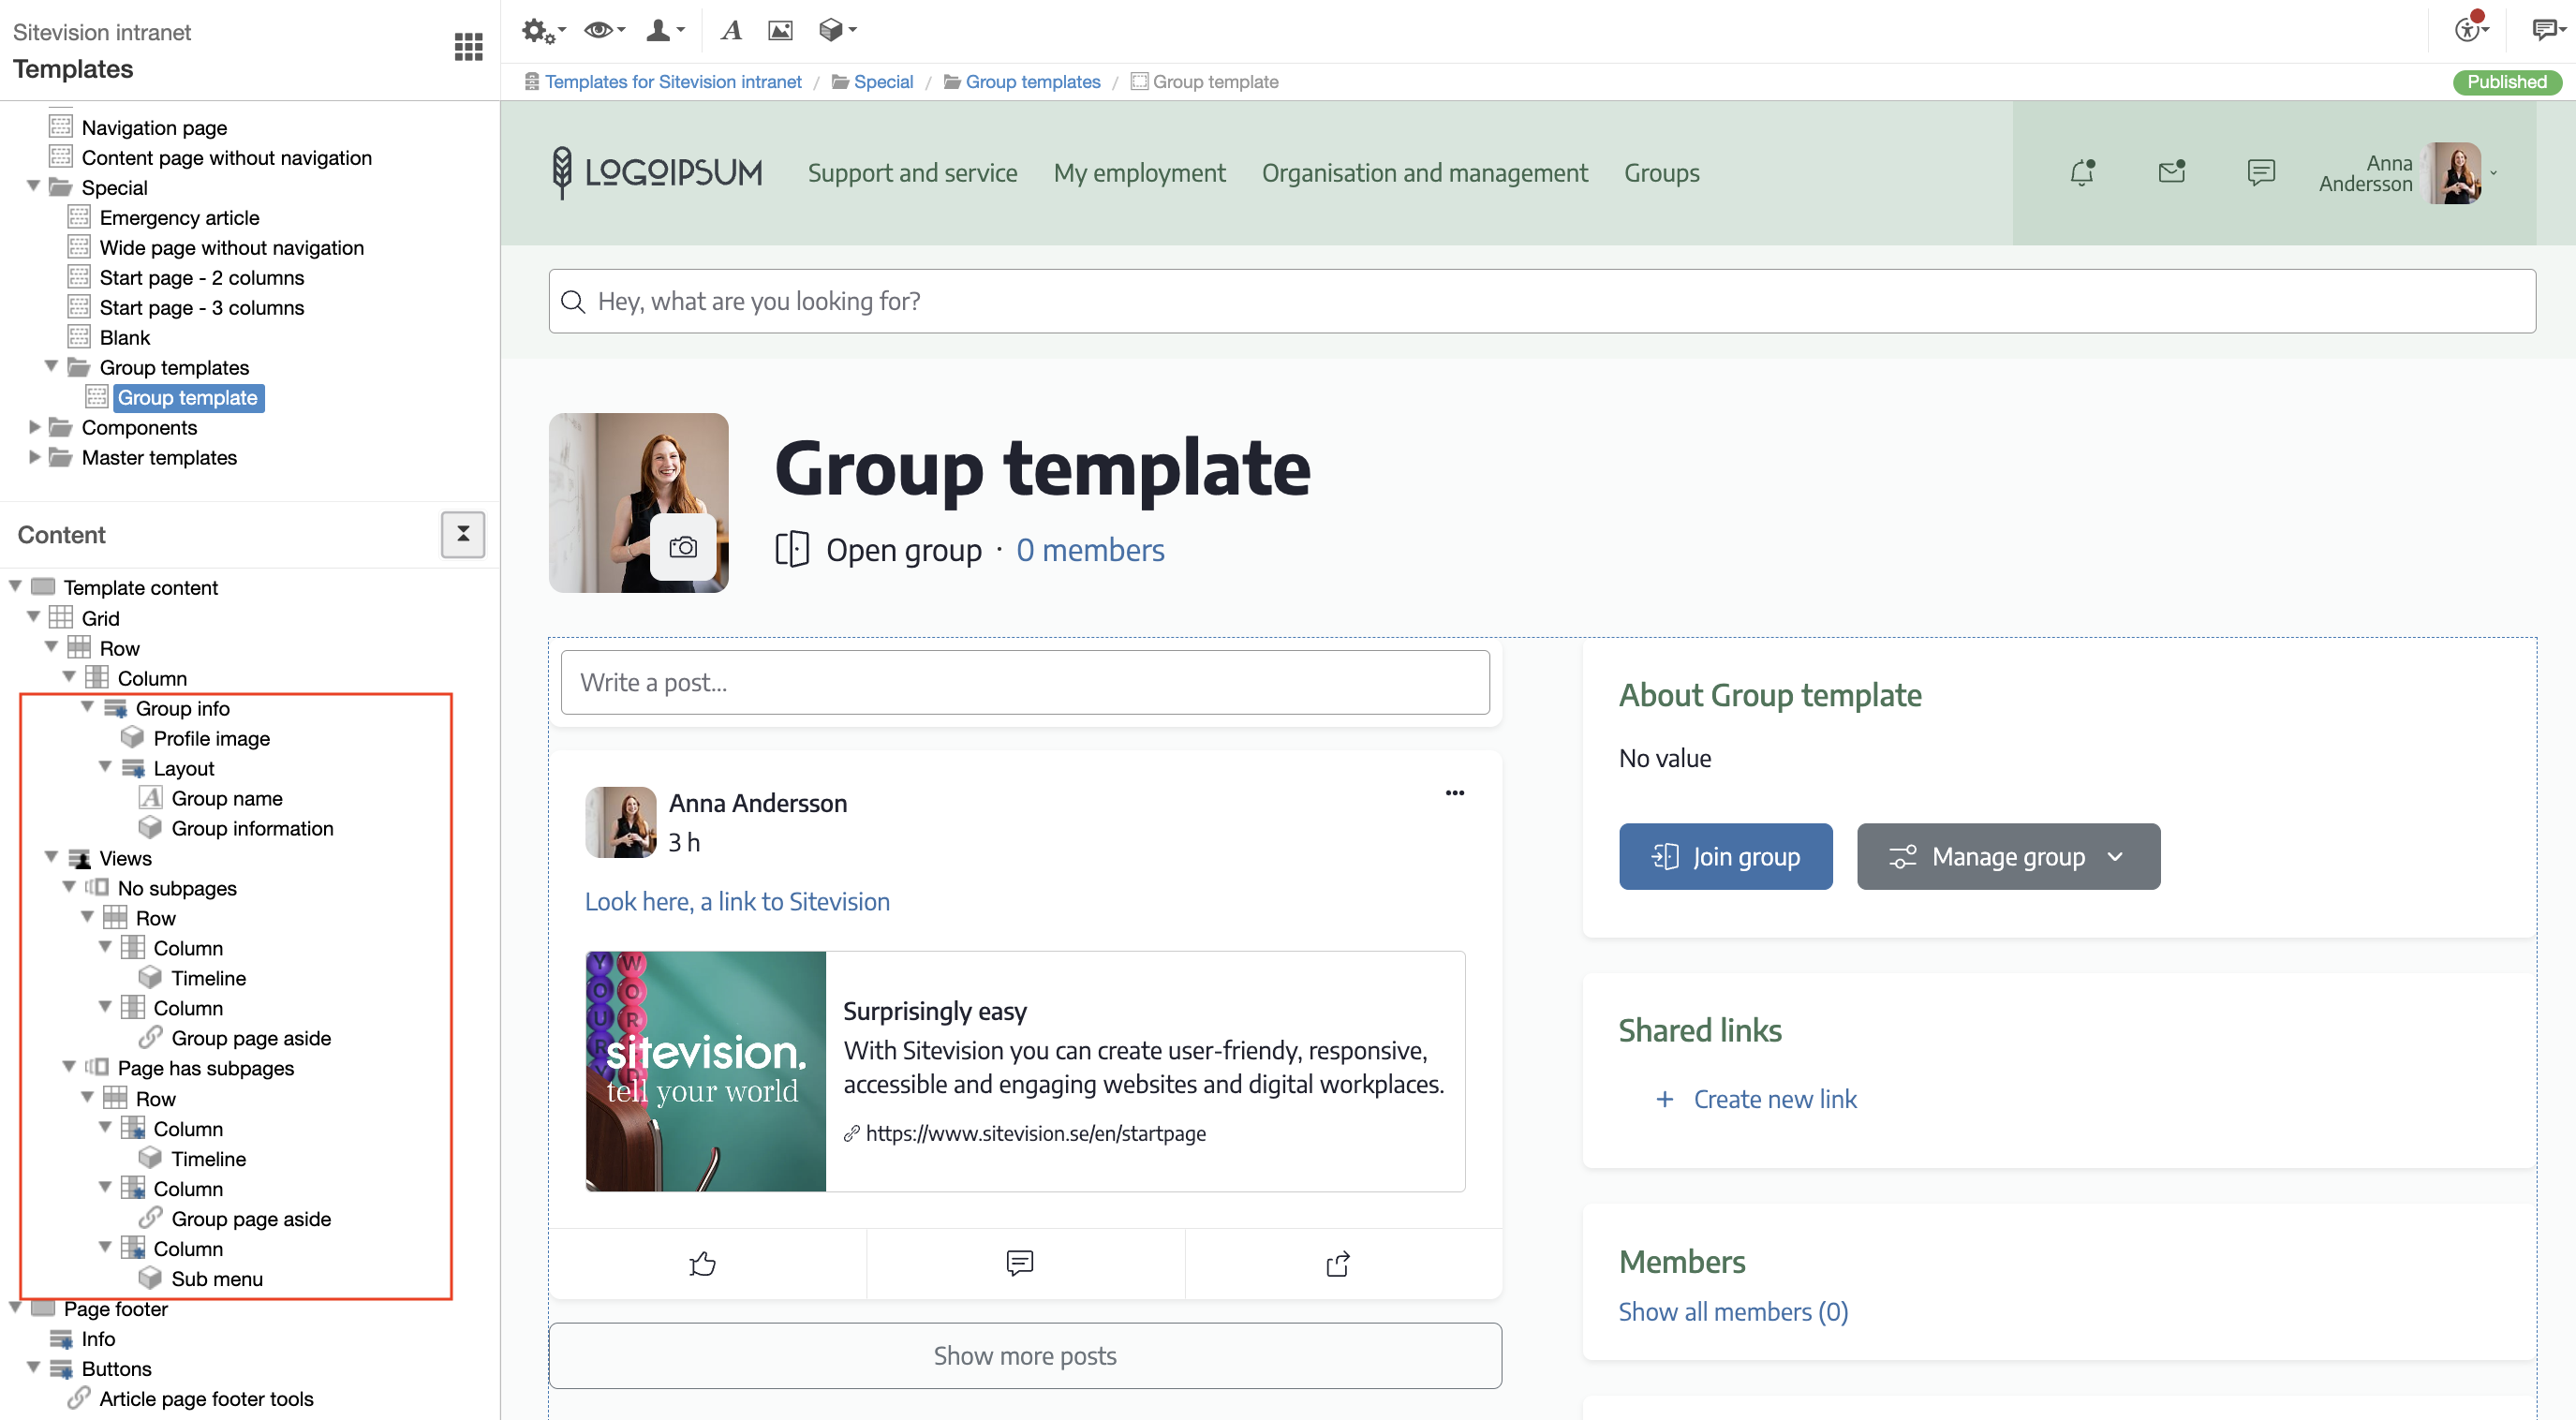 Templates - Group template